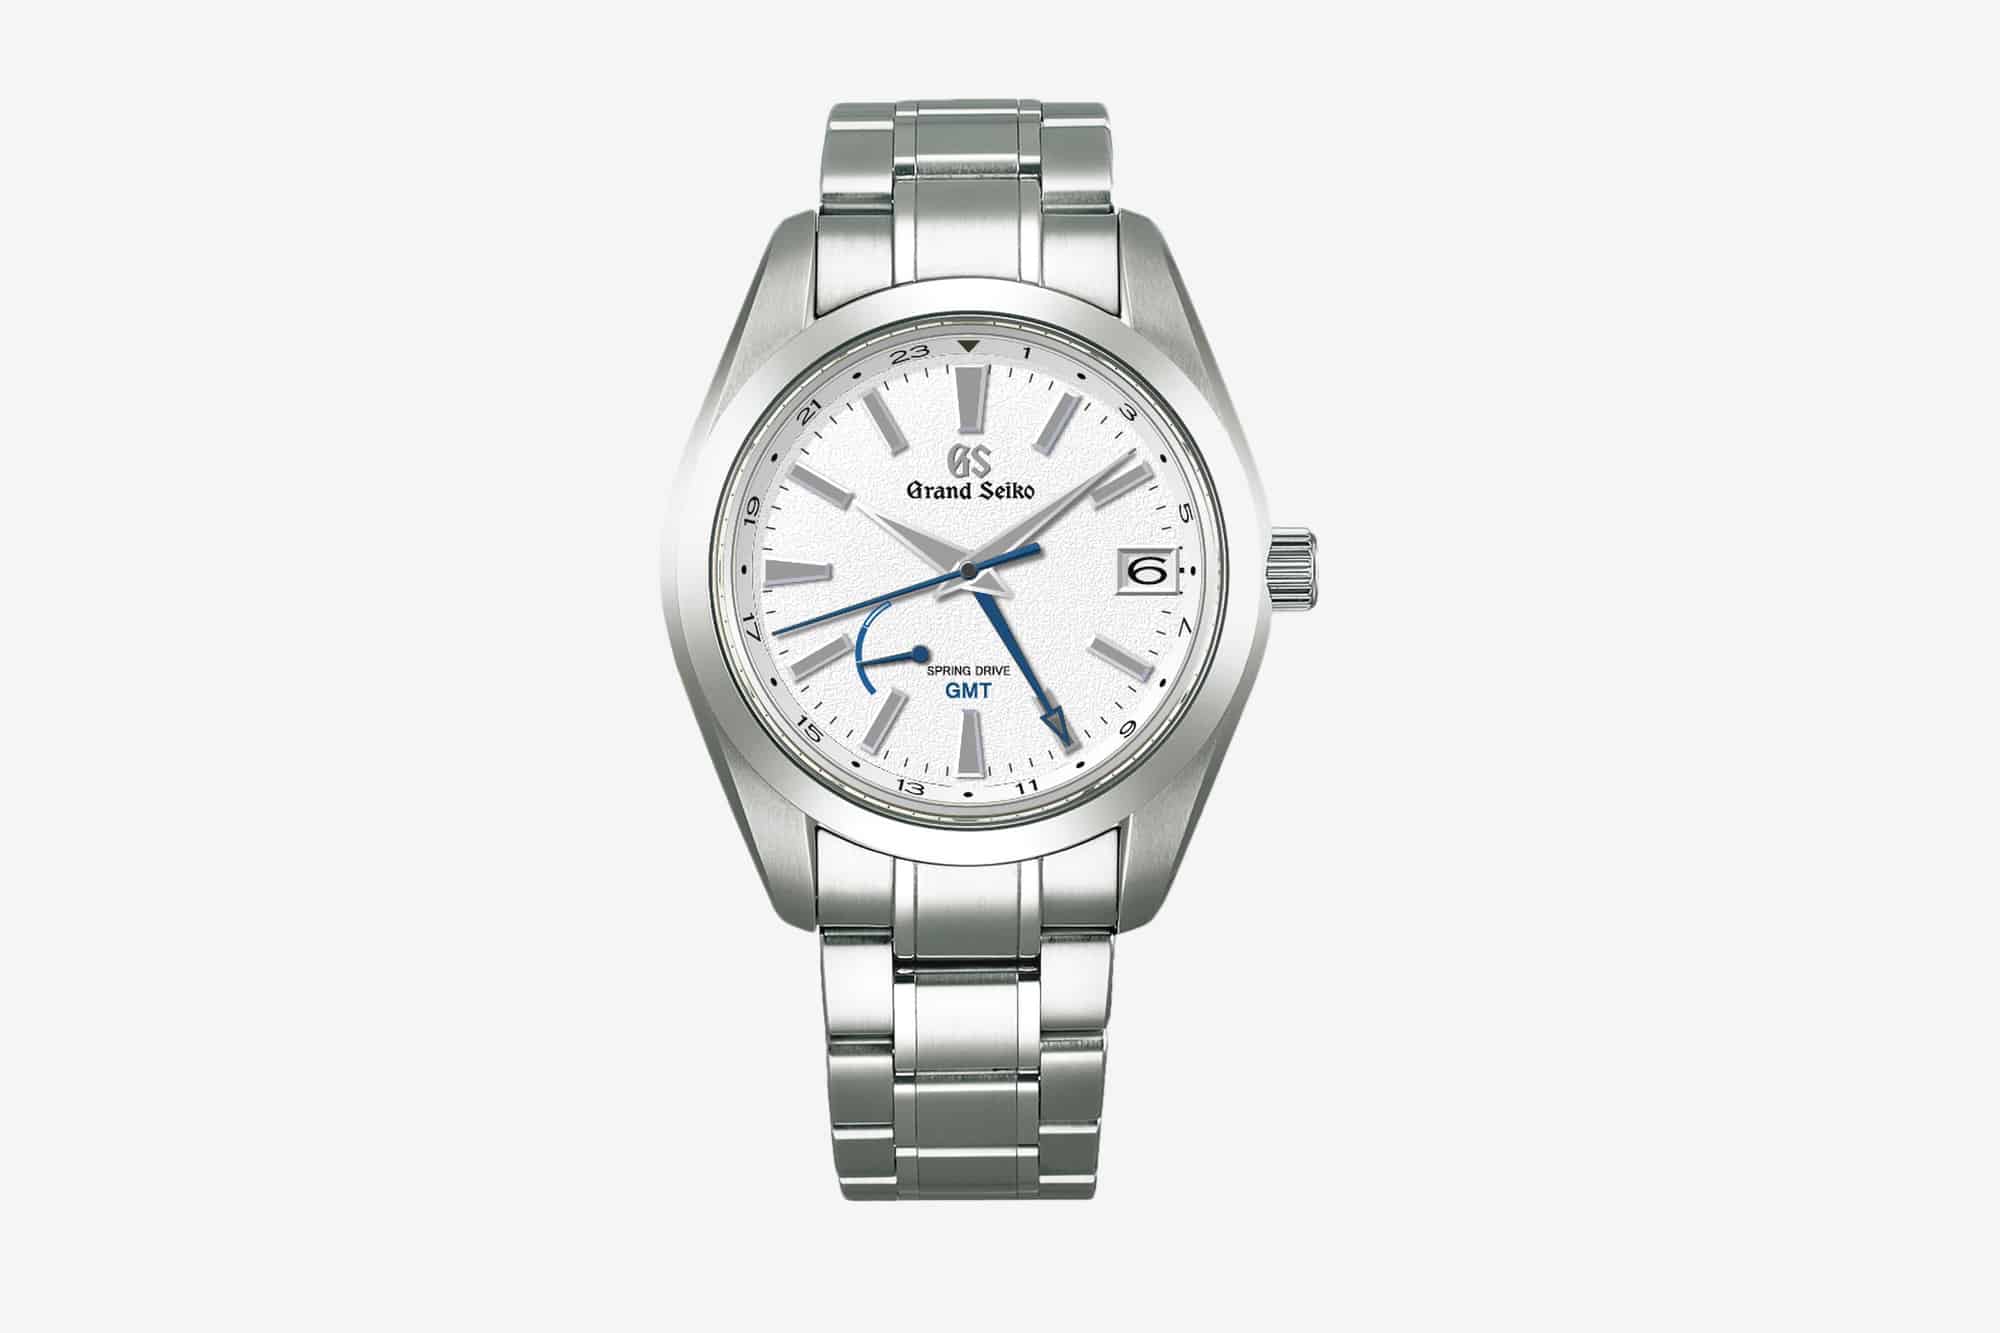 Introducing the Grand Seiko Spring Drive GMT Ref. SBGE249 (Limited Edition with Timeless Luxury)